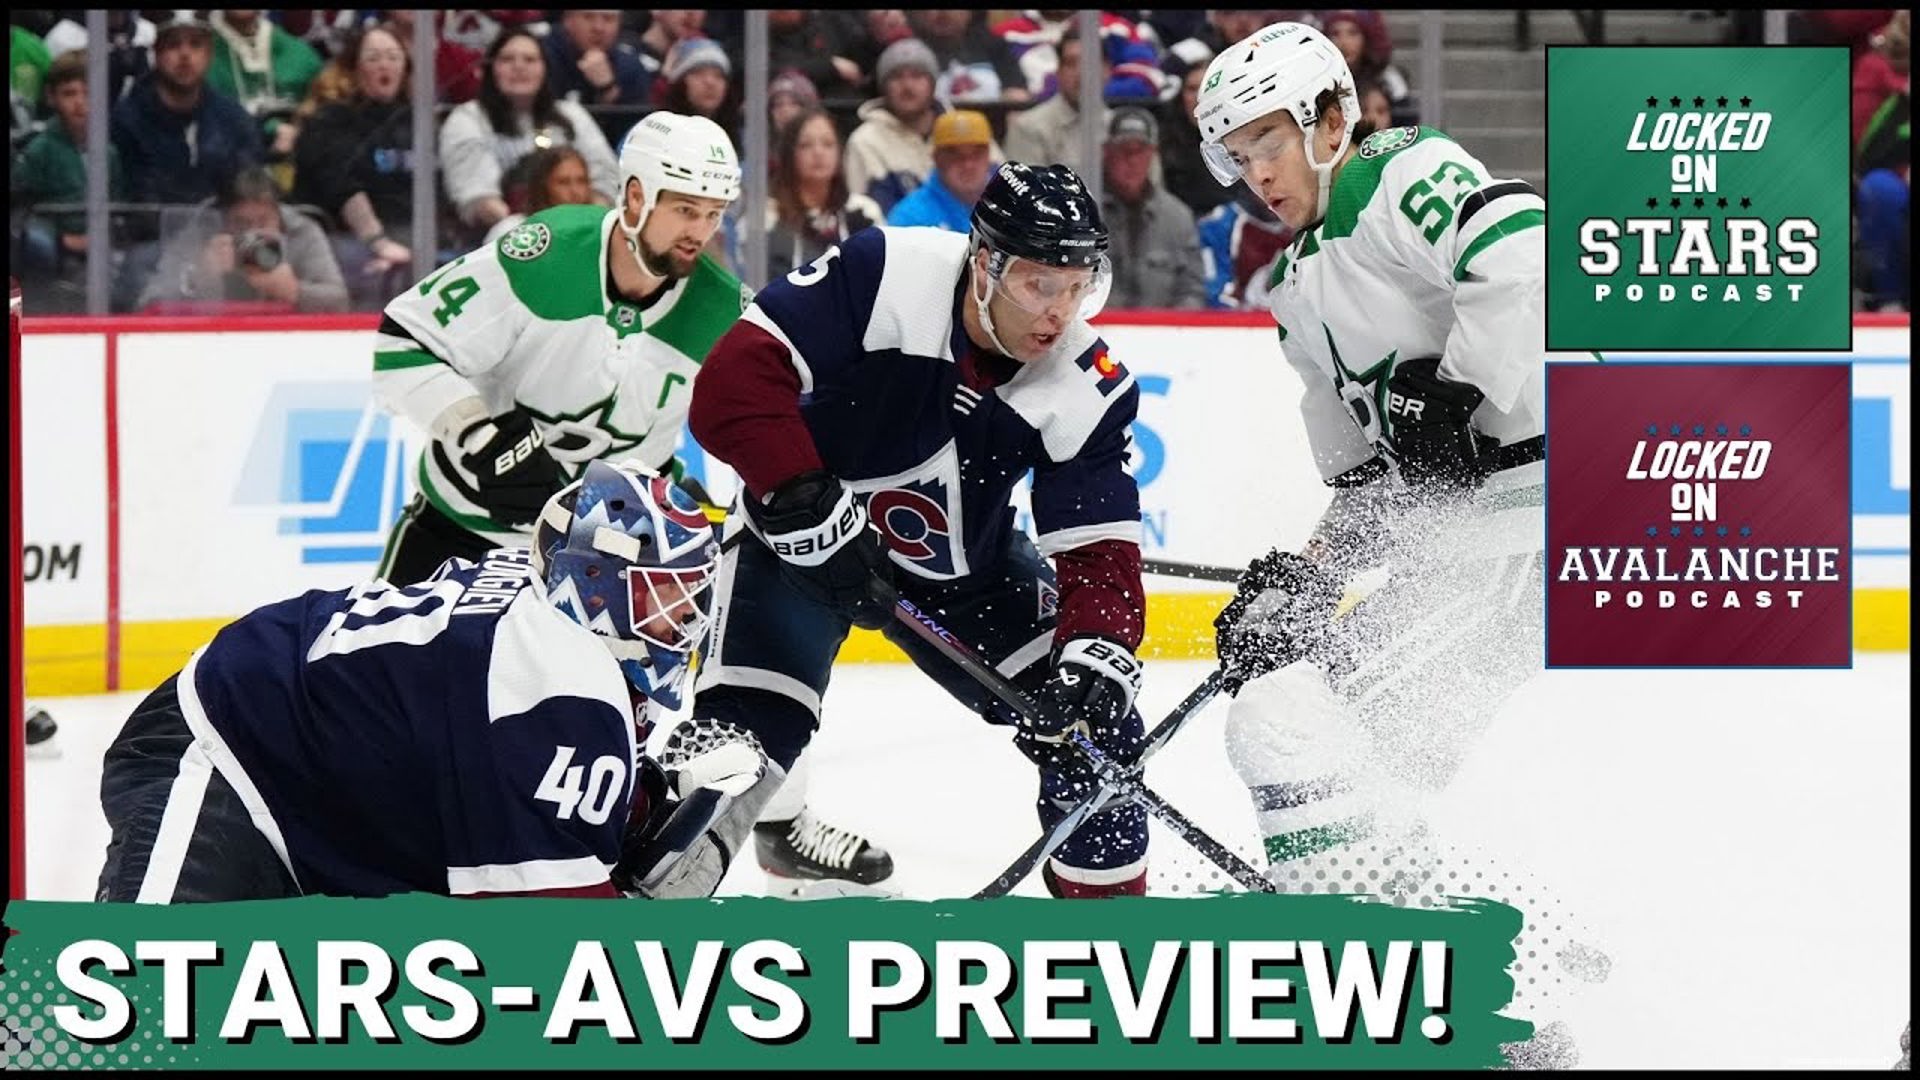 Joey from Locked On Stars and Chris from Locked On Avalanche discuss all things Stars and Avs